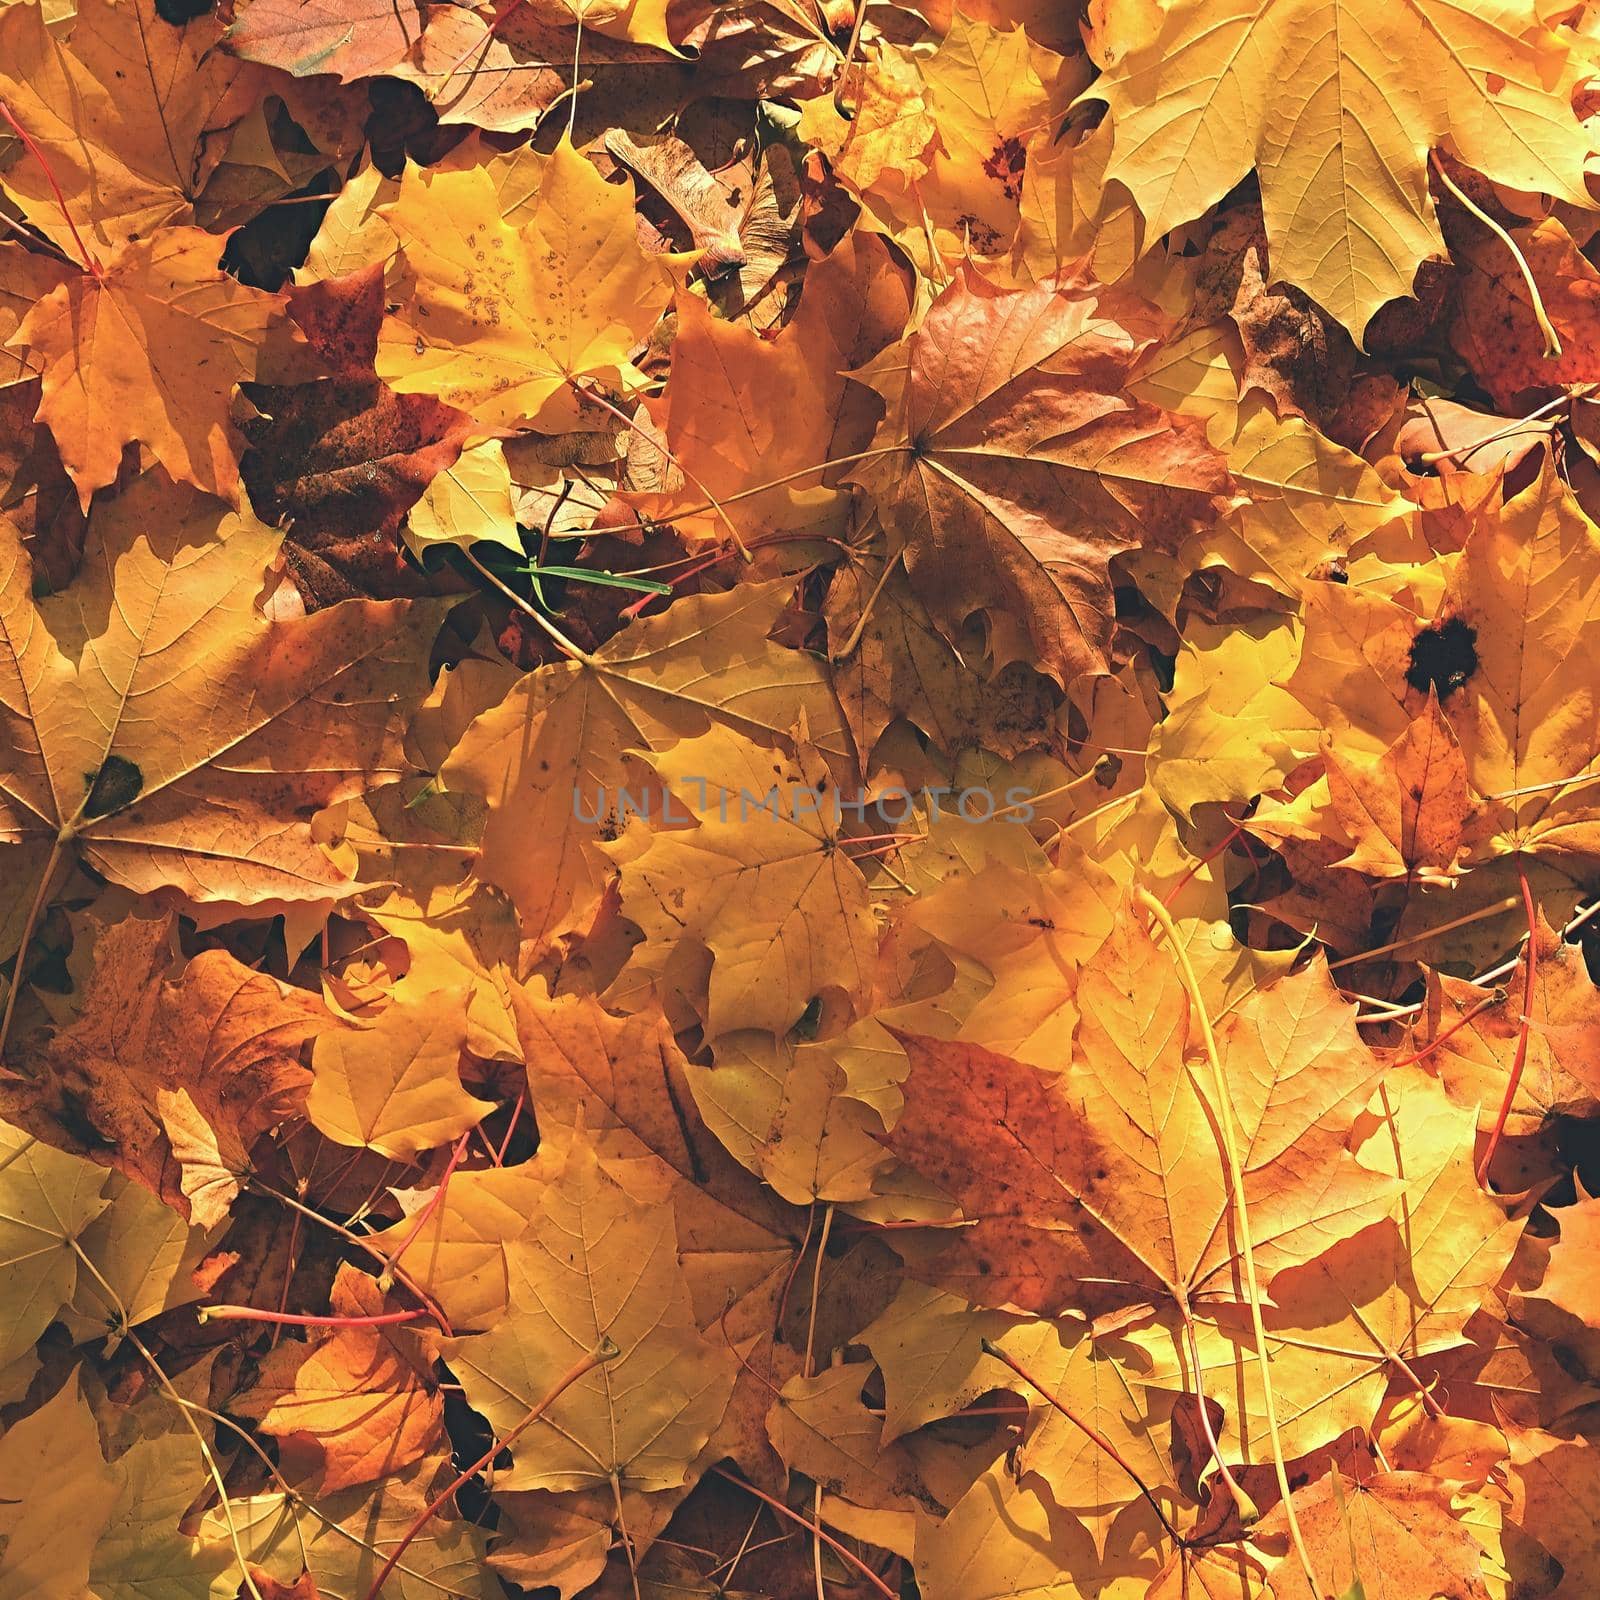 Autumn leaves. Natural seasonal colored background by Montypeter